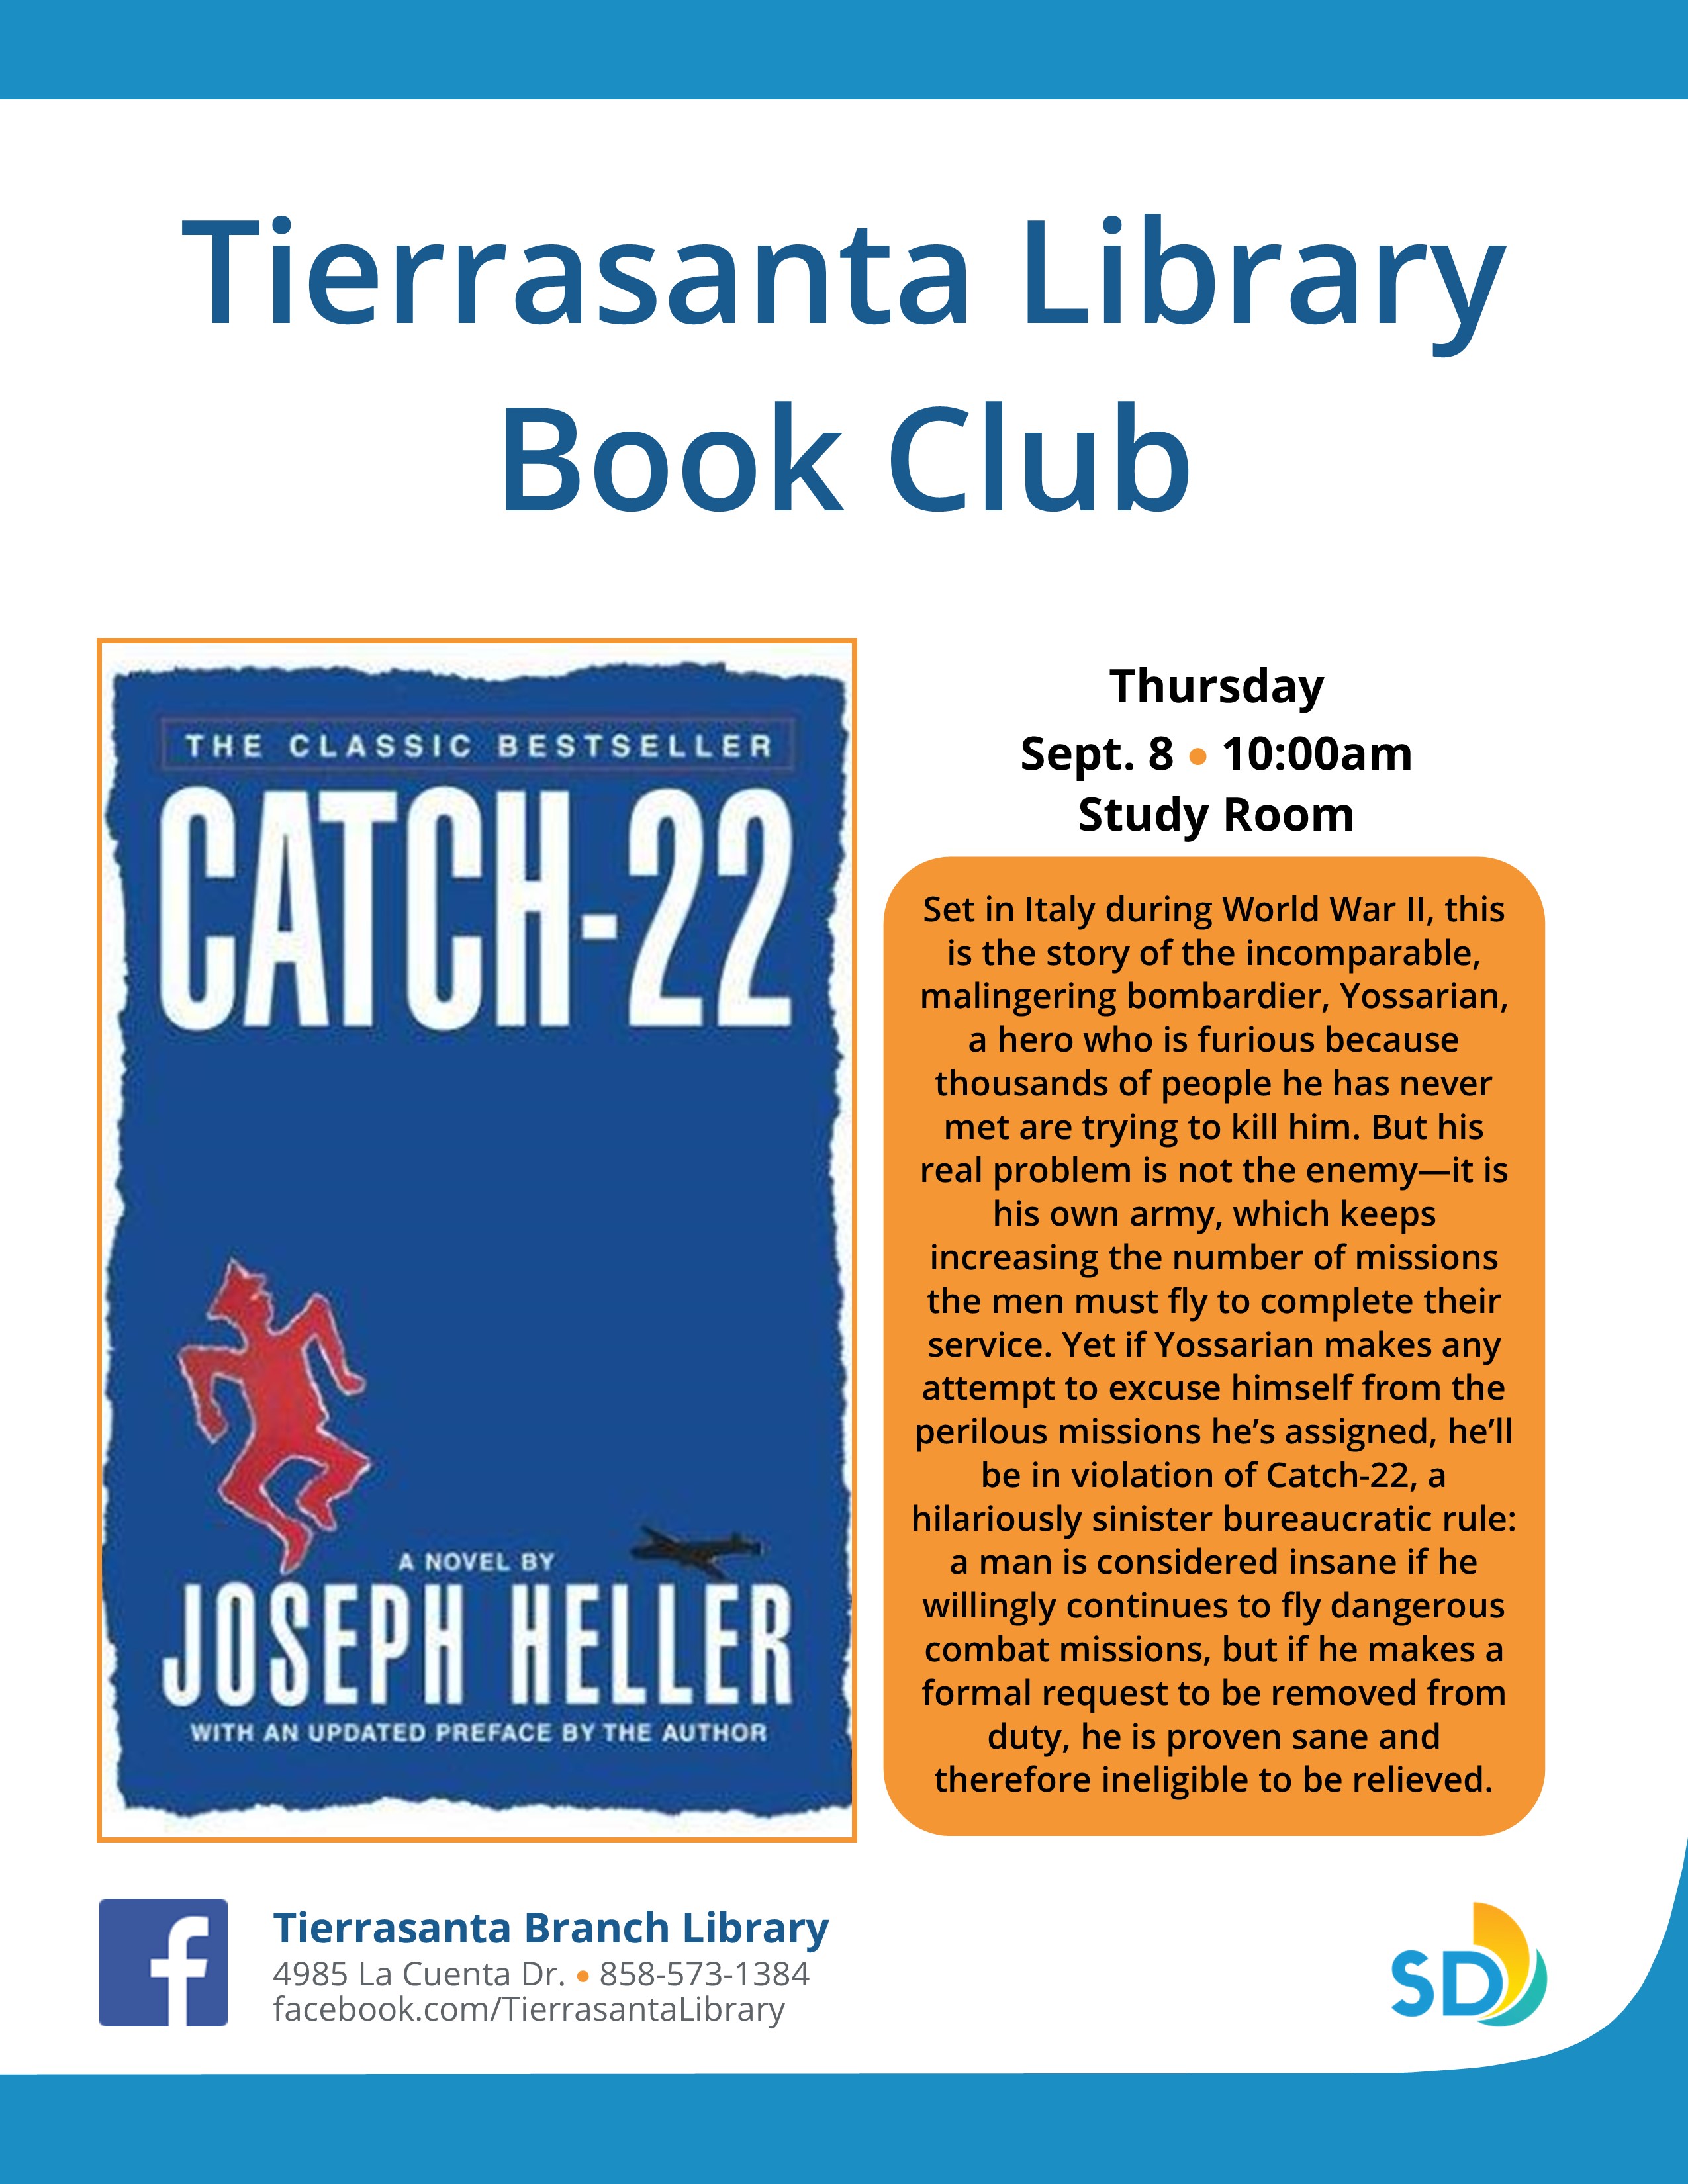 Flyer with dark blue book cover for Catch-22 by Joseph Heller